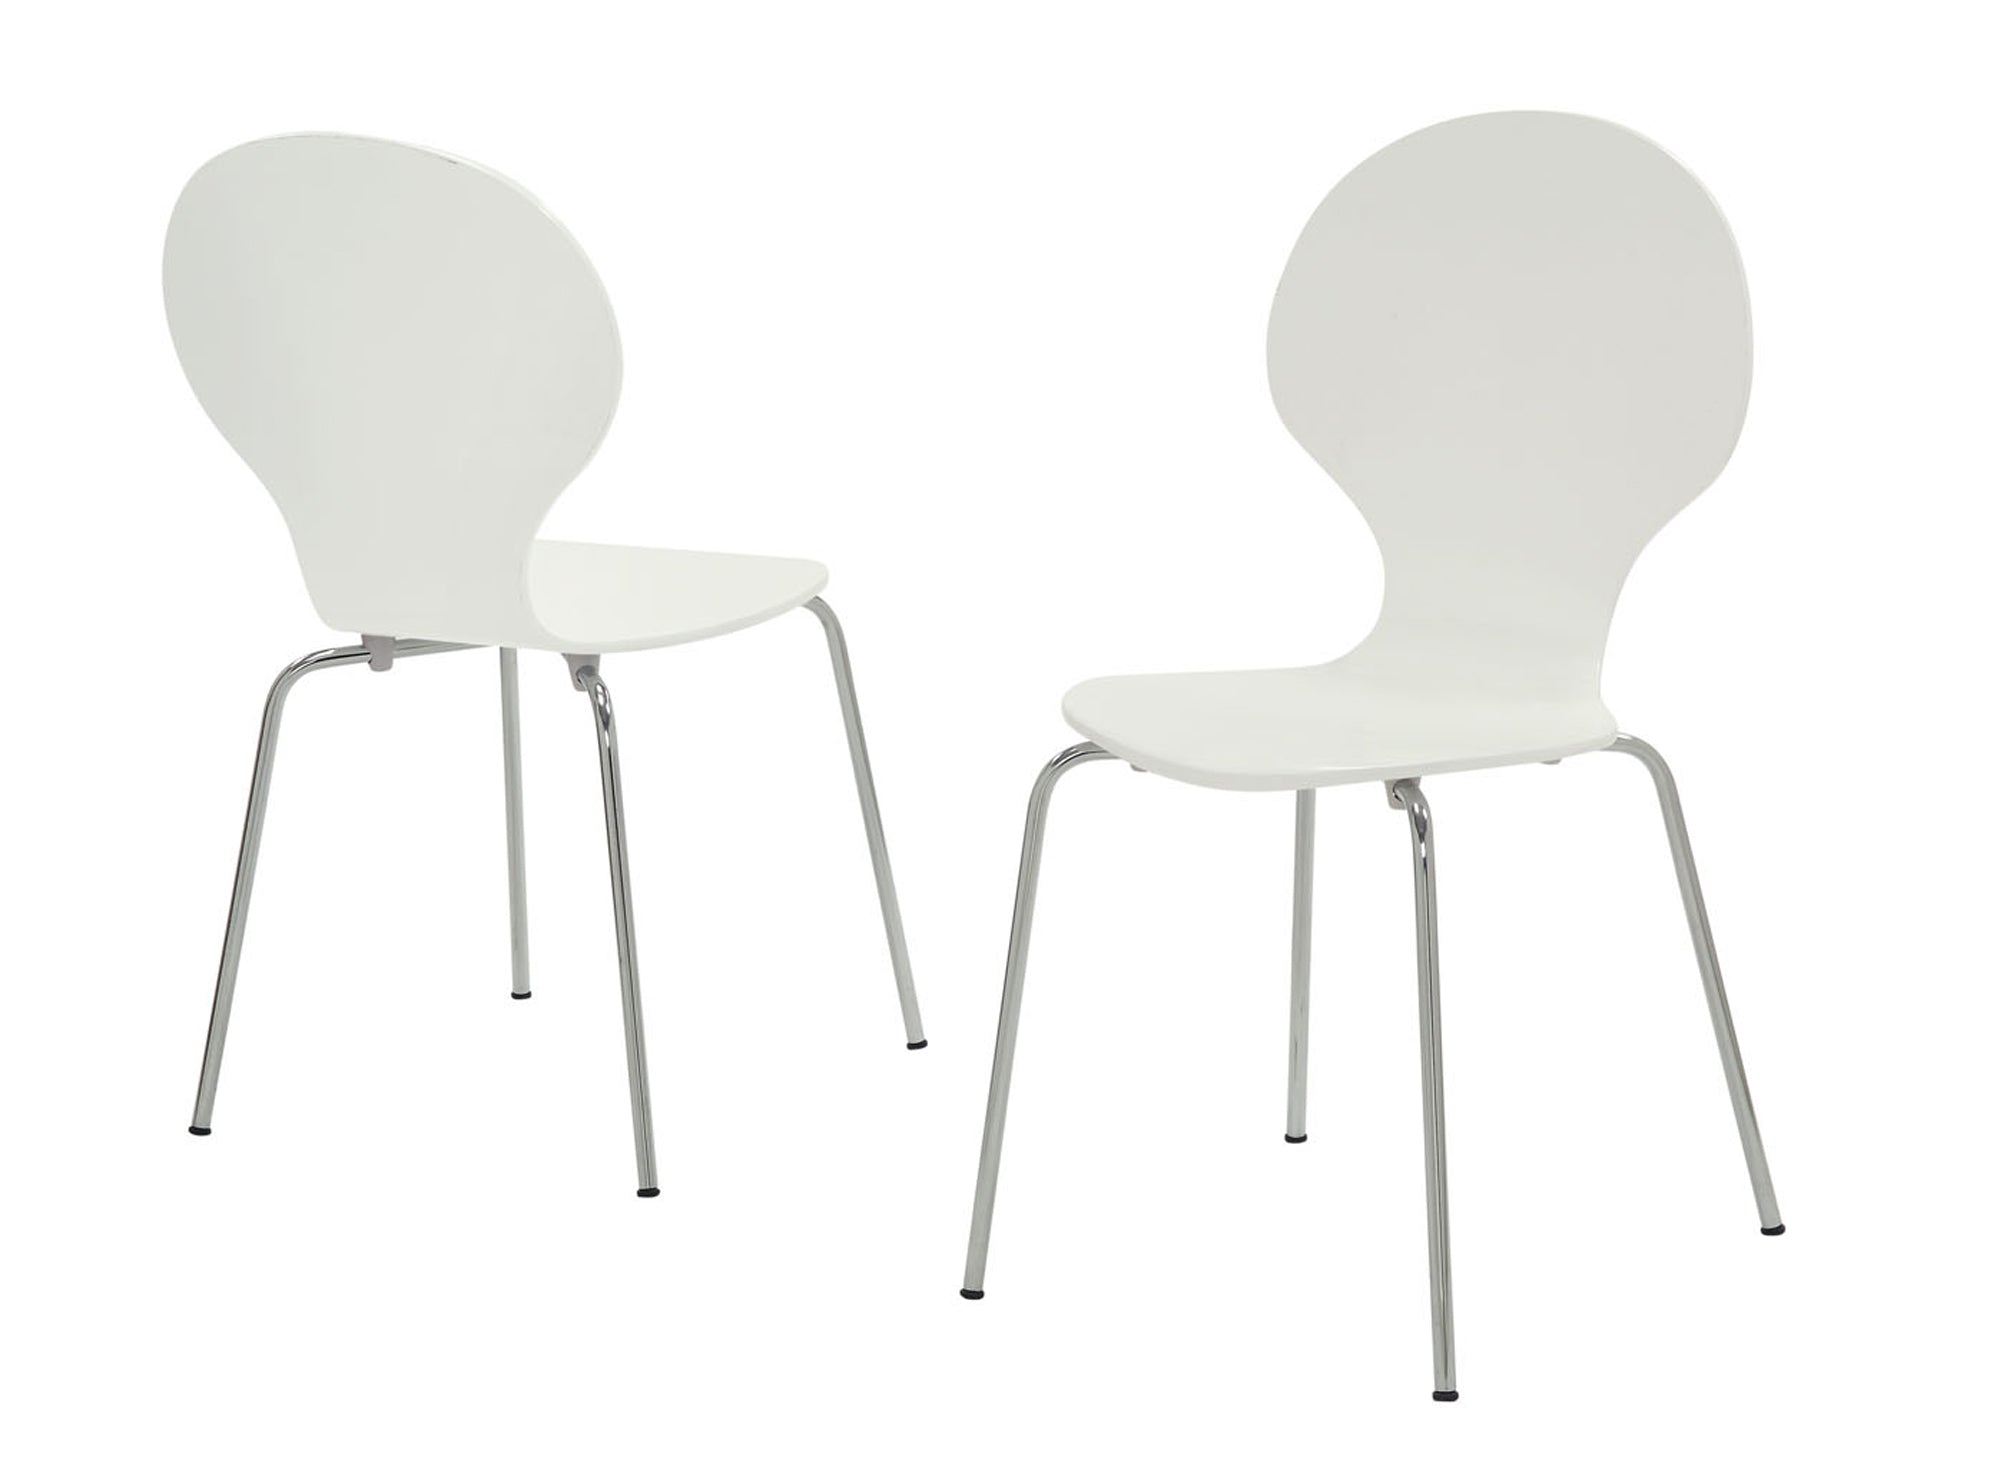 63.75" x 53.25" x 102" White, Metal - 4 Dining Chairs